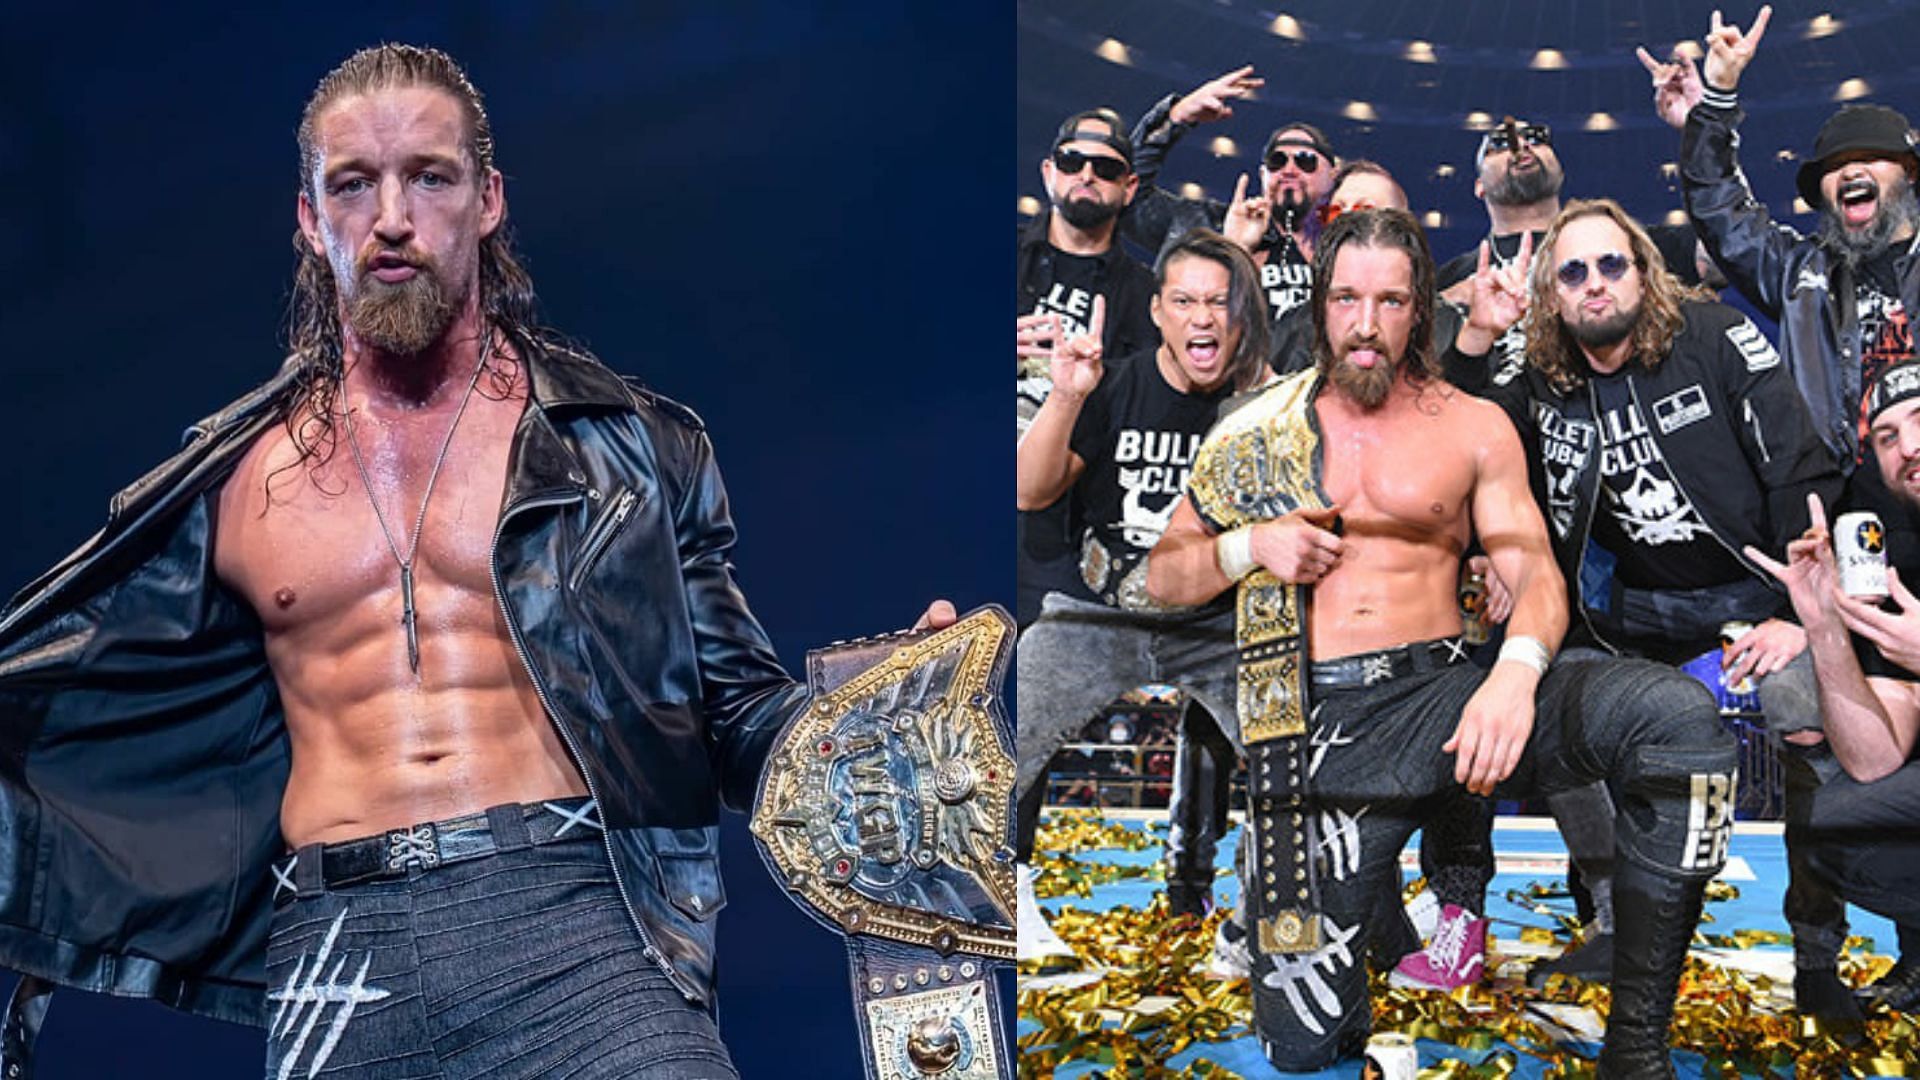 Bullet Club leader Jay White sends a message after his faction members